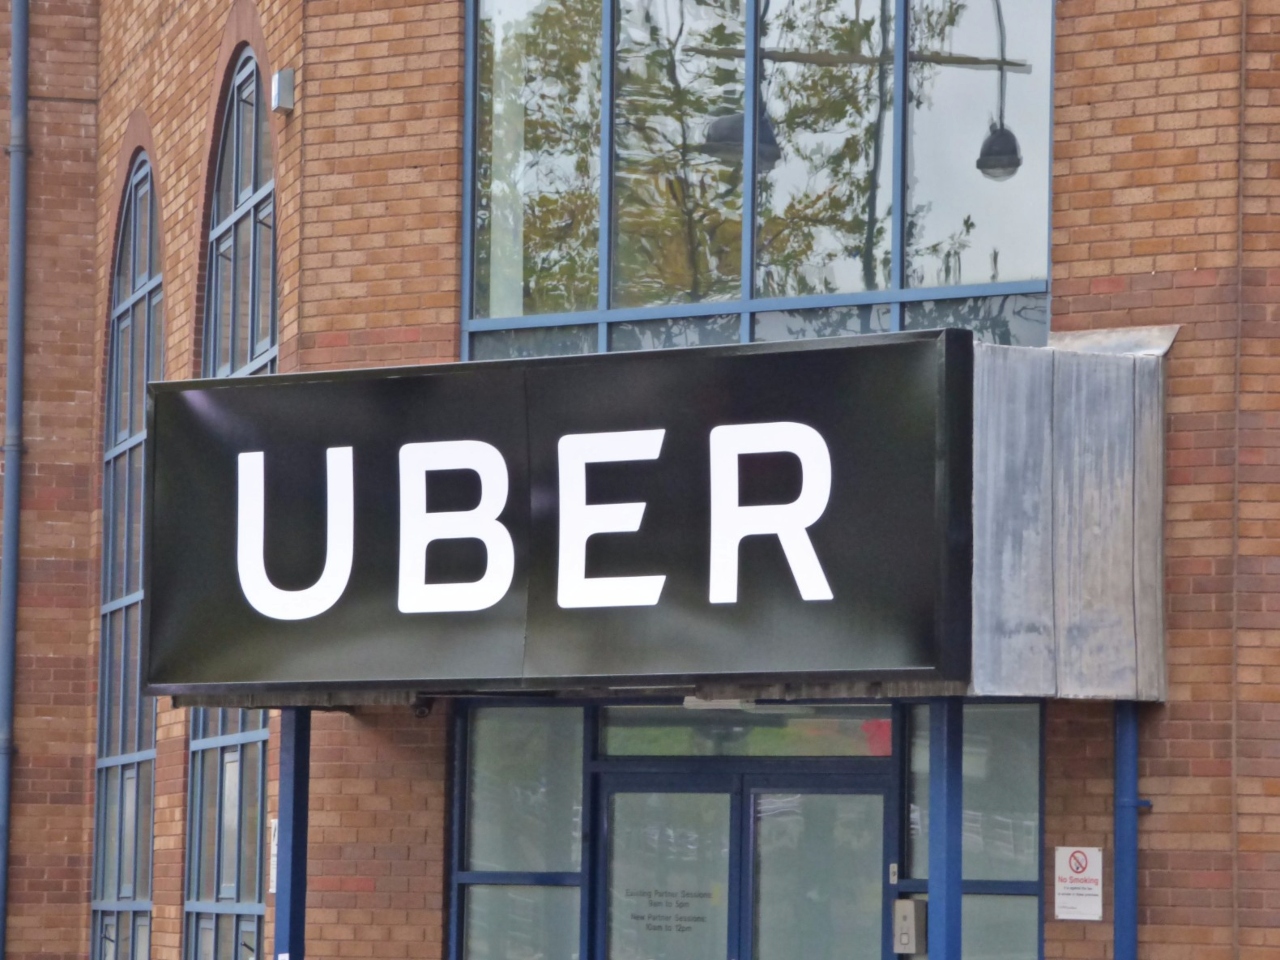 On Thursday, a famous ride-share company, Uber, was hacked by an alleged 18-year-old who accessed financial documents and internal employee messages.